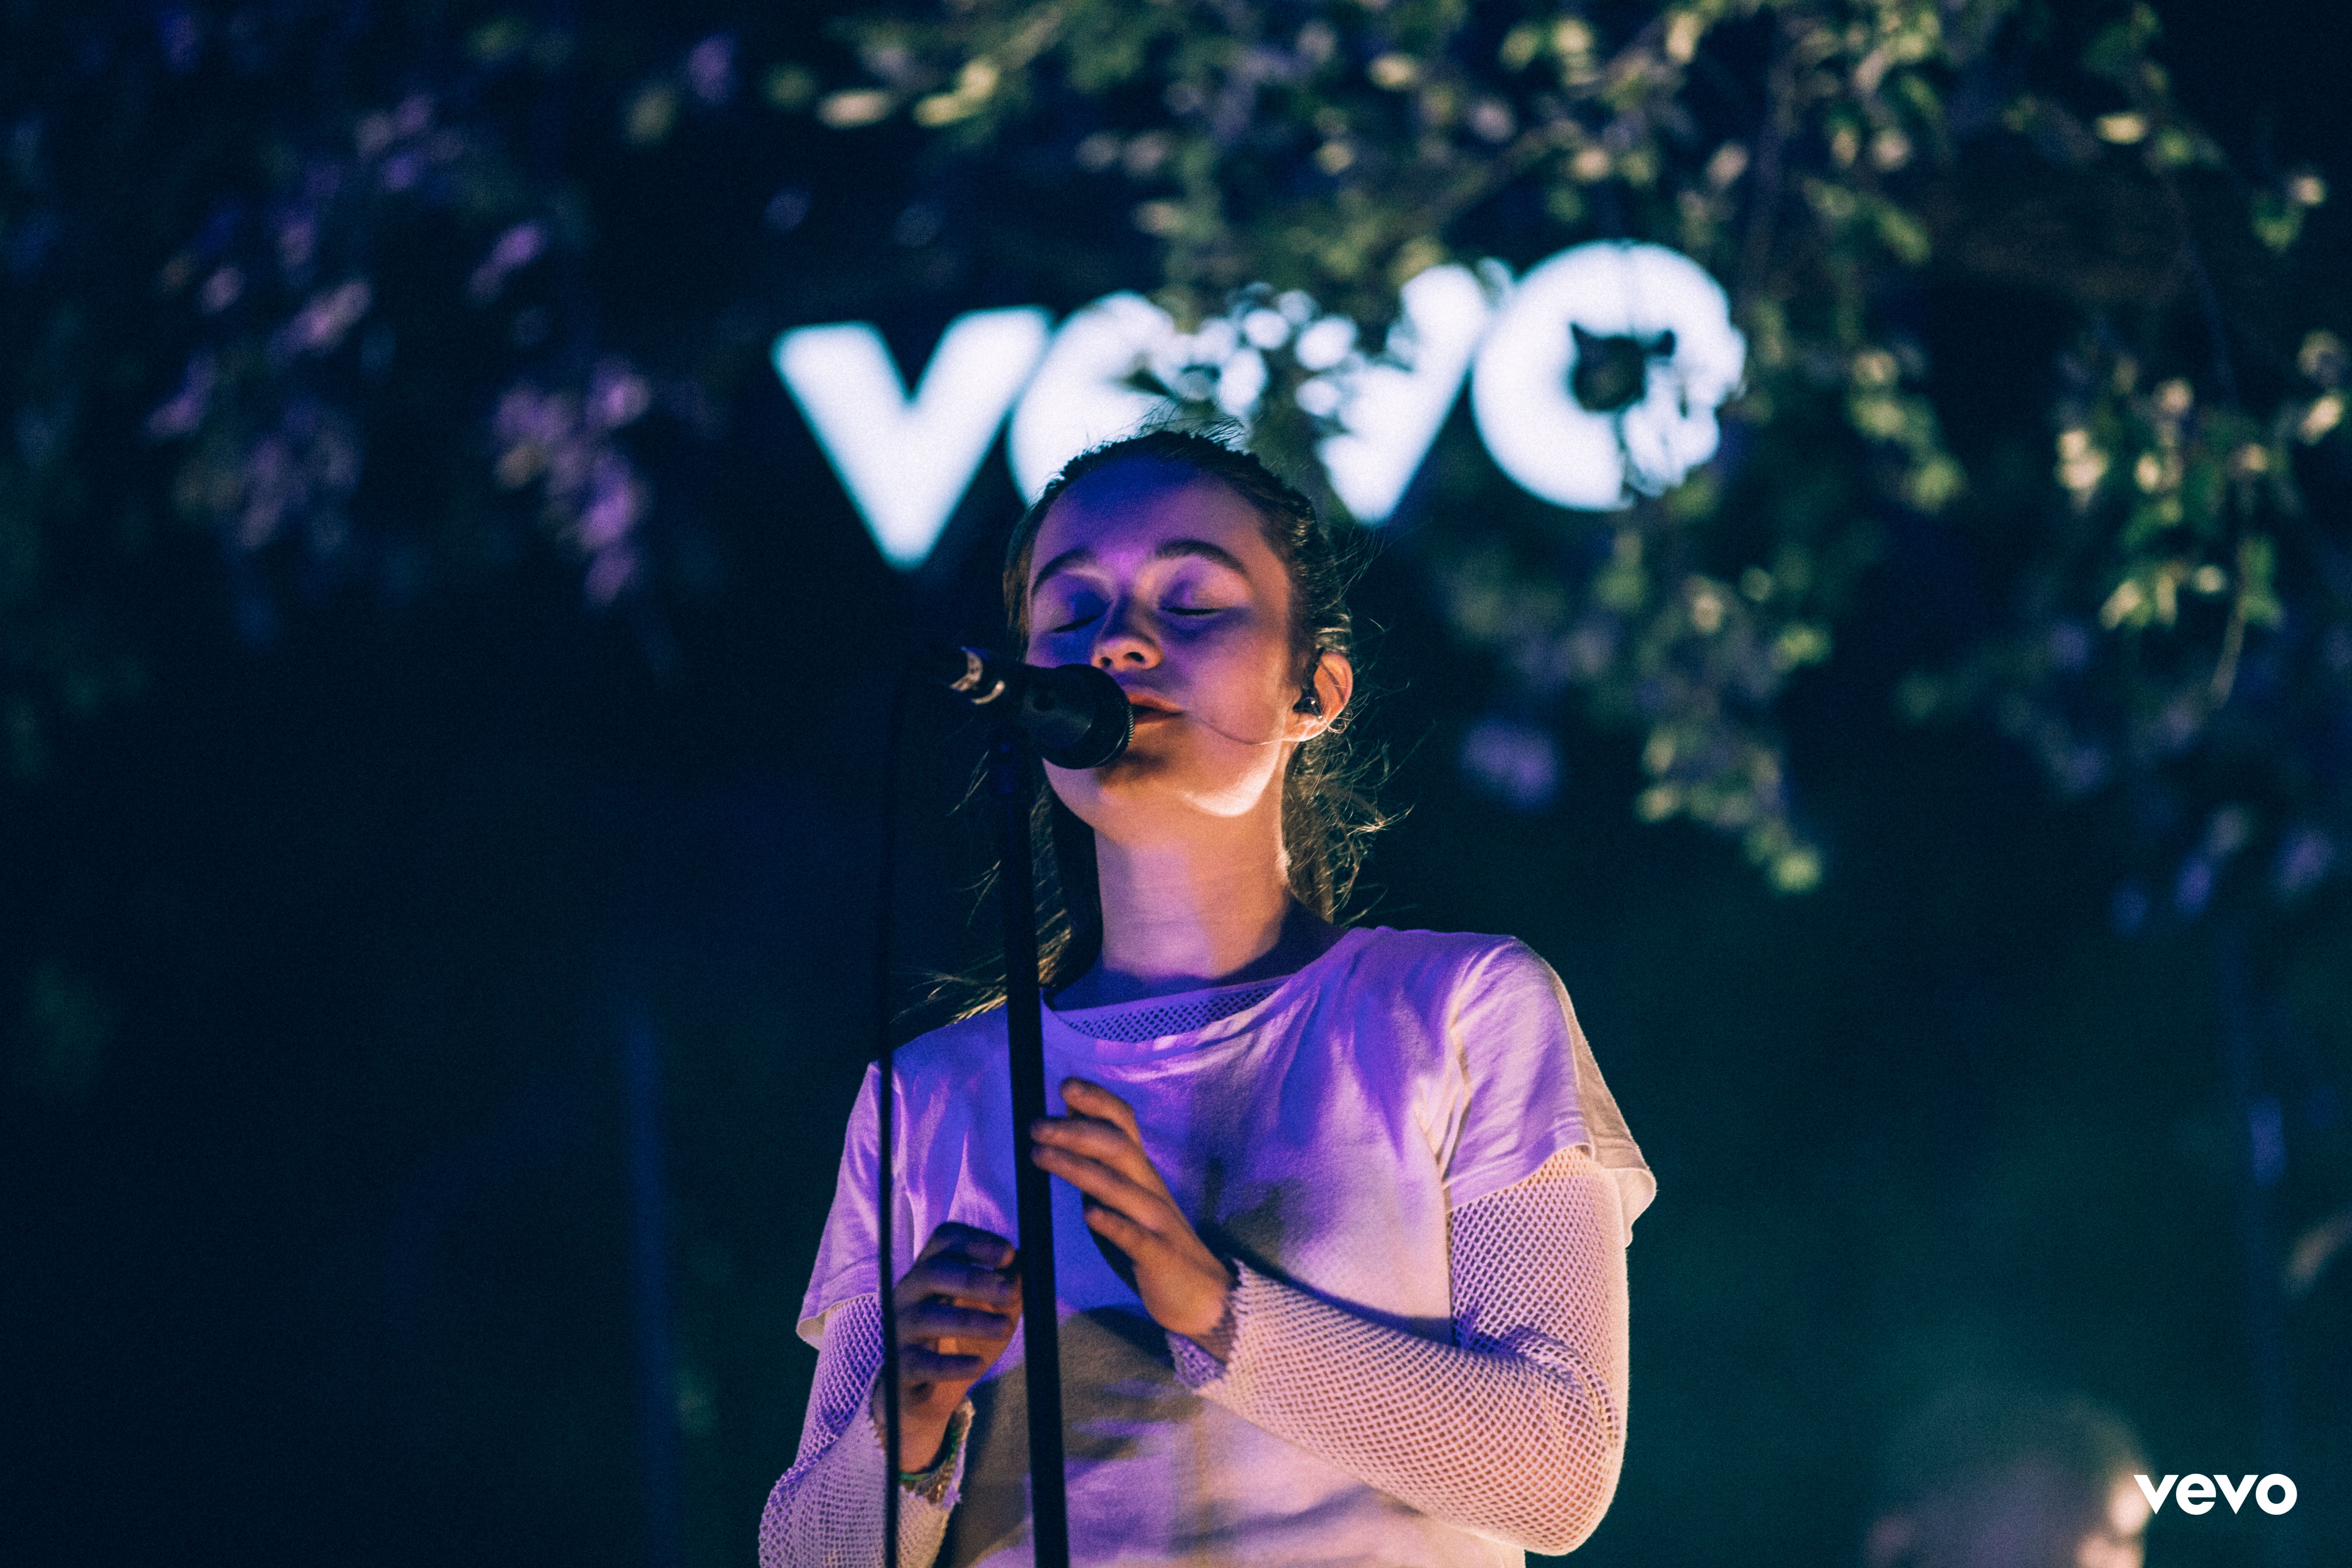 Sigrid Performs at Vevo House During SxSw Music Week 2017